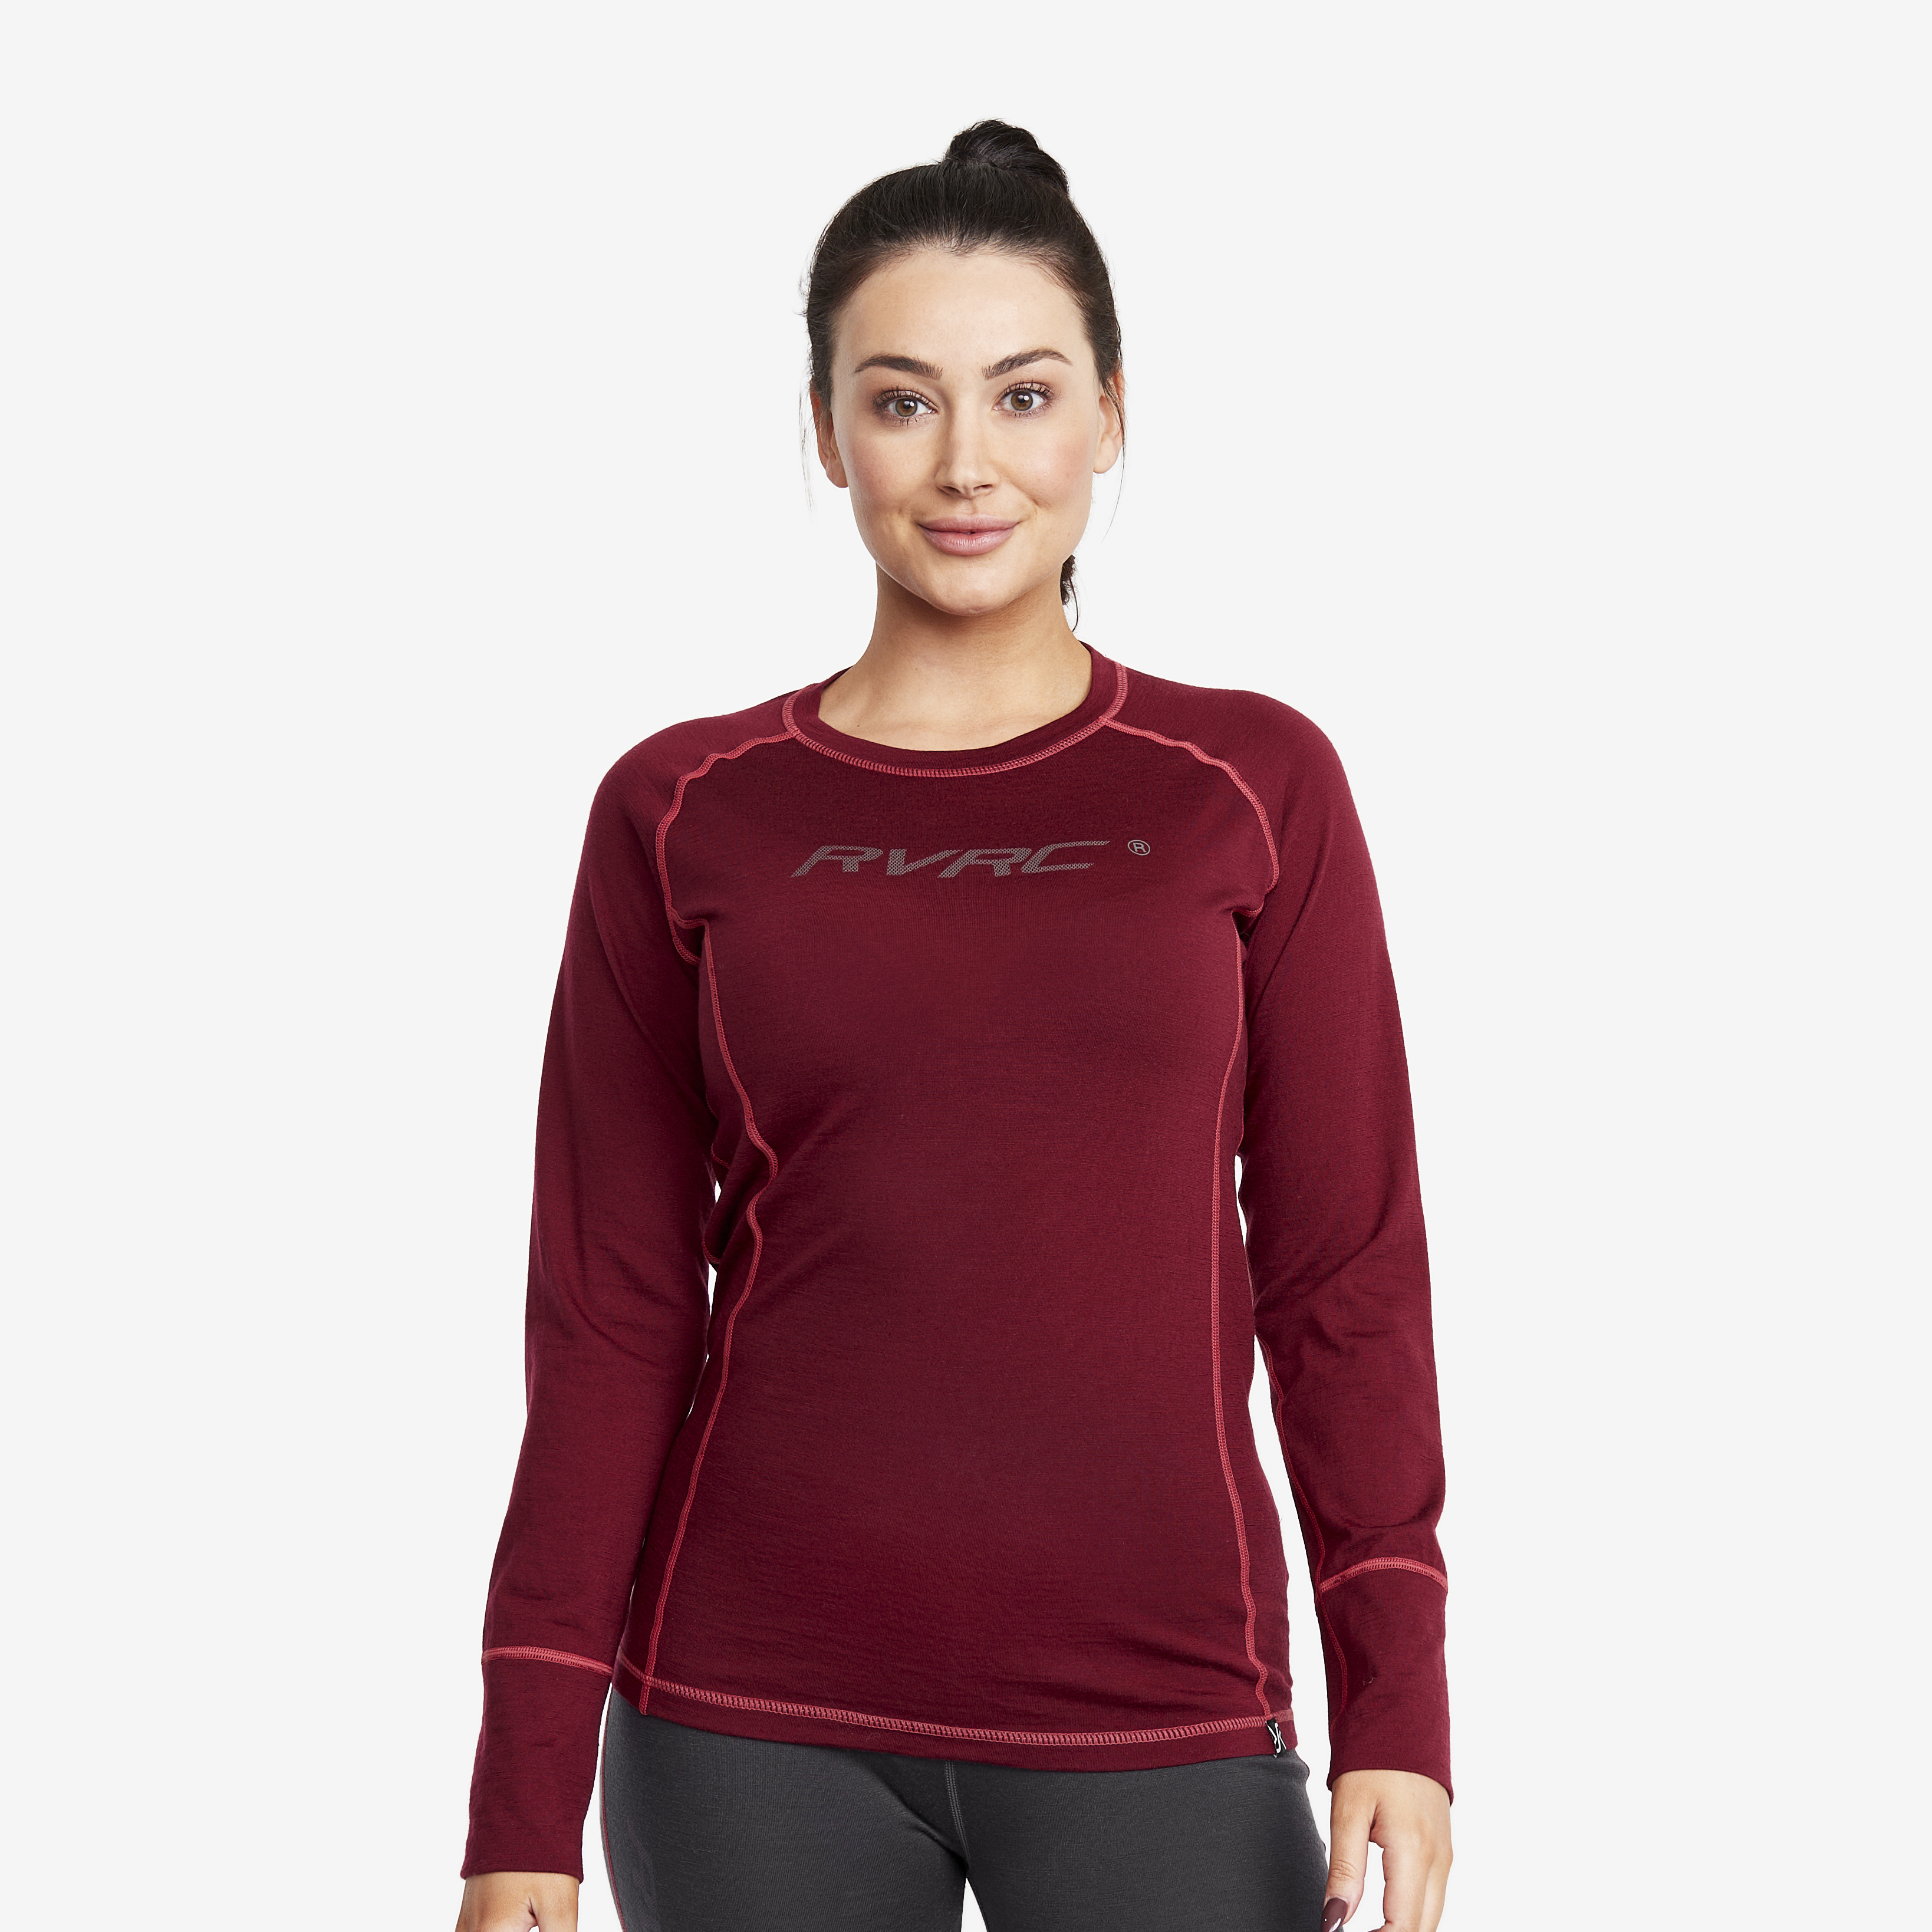 Outright Merino Top Bison Red/Anthracite Women